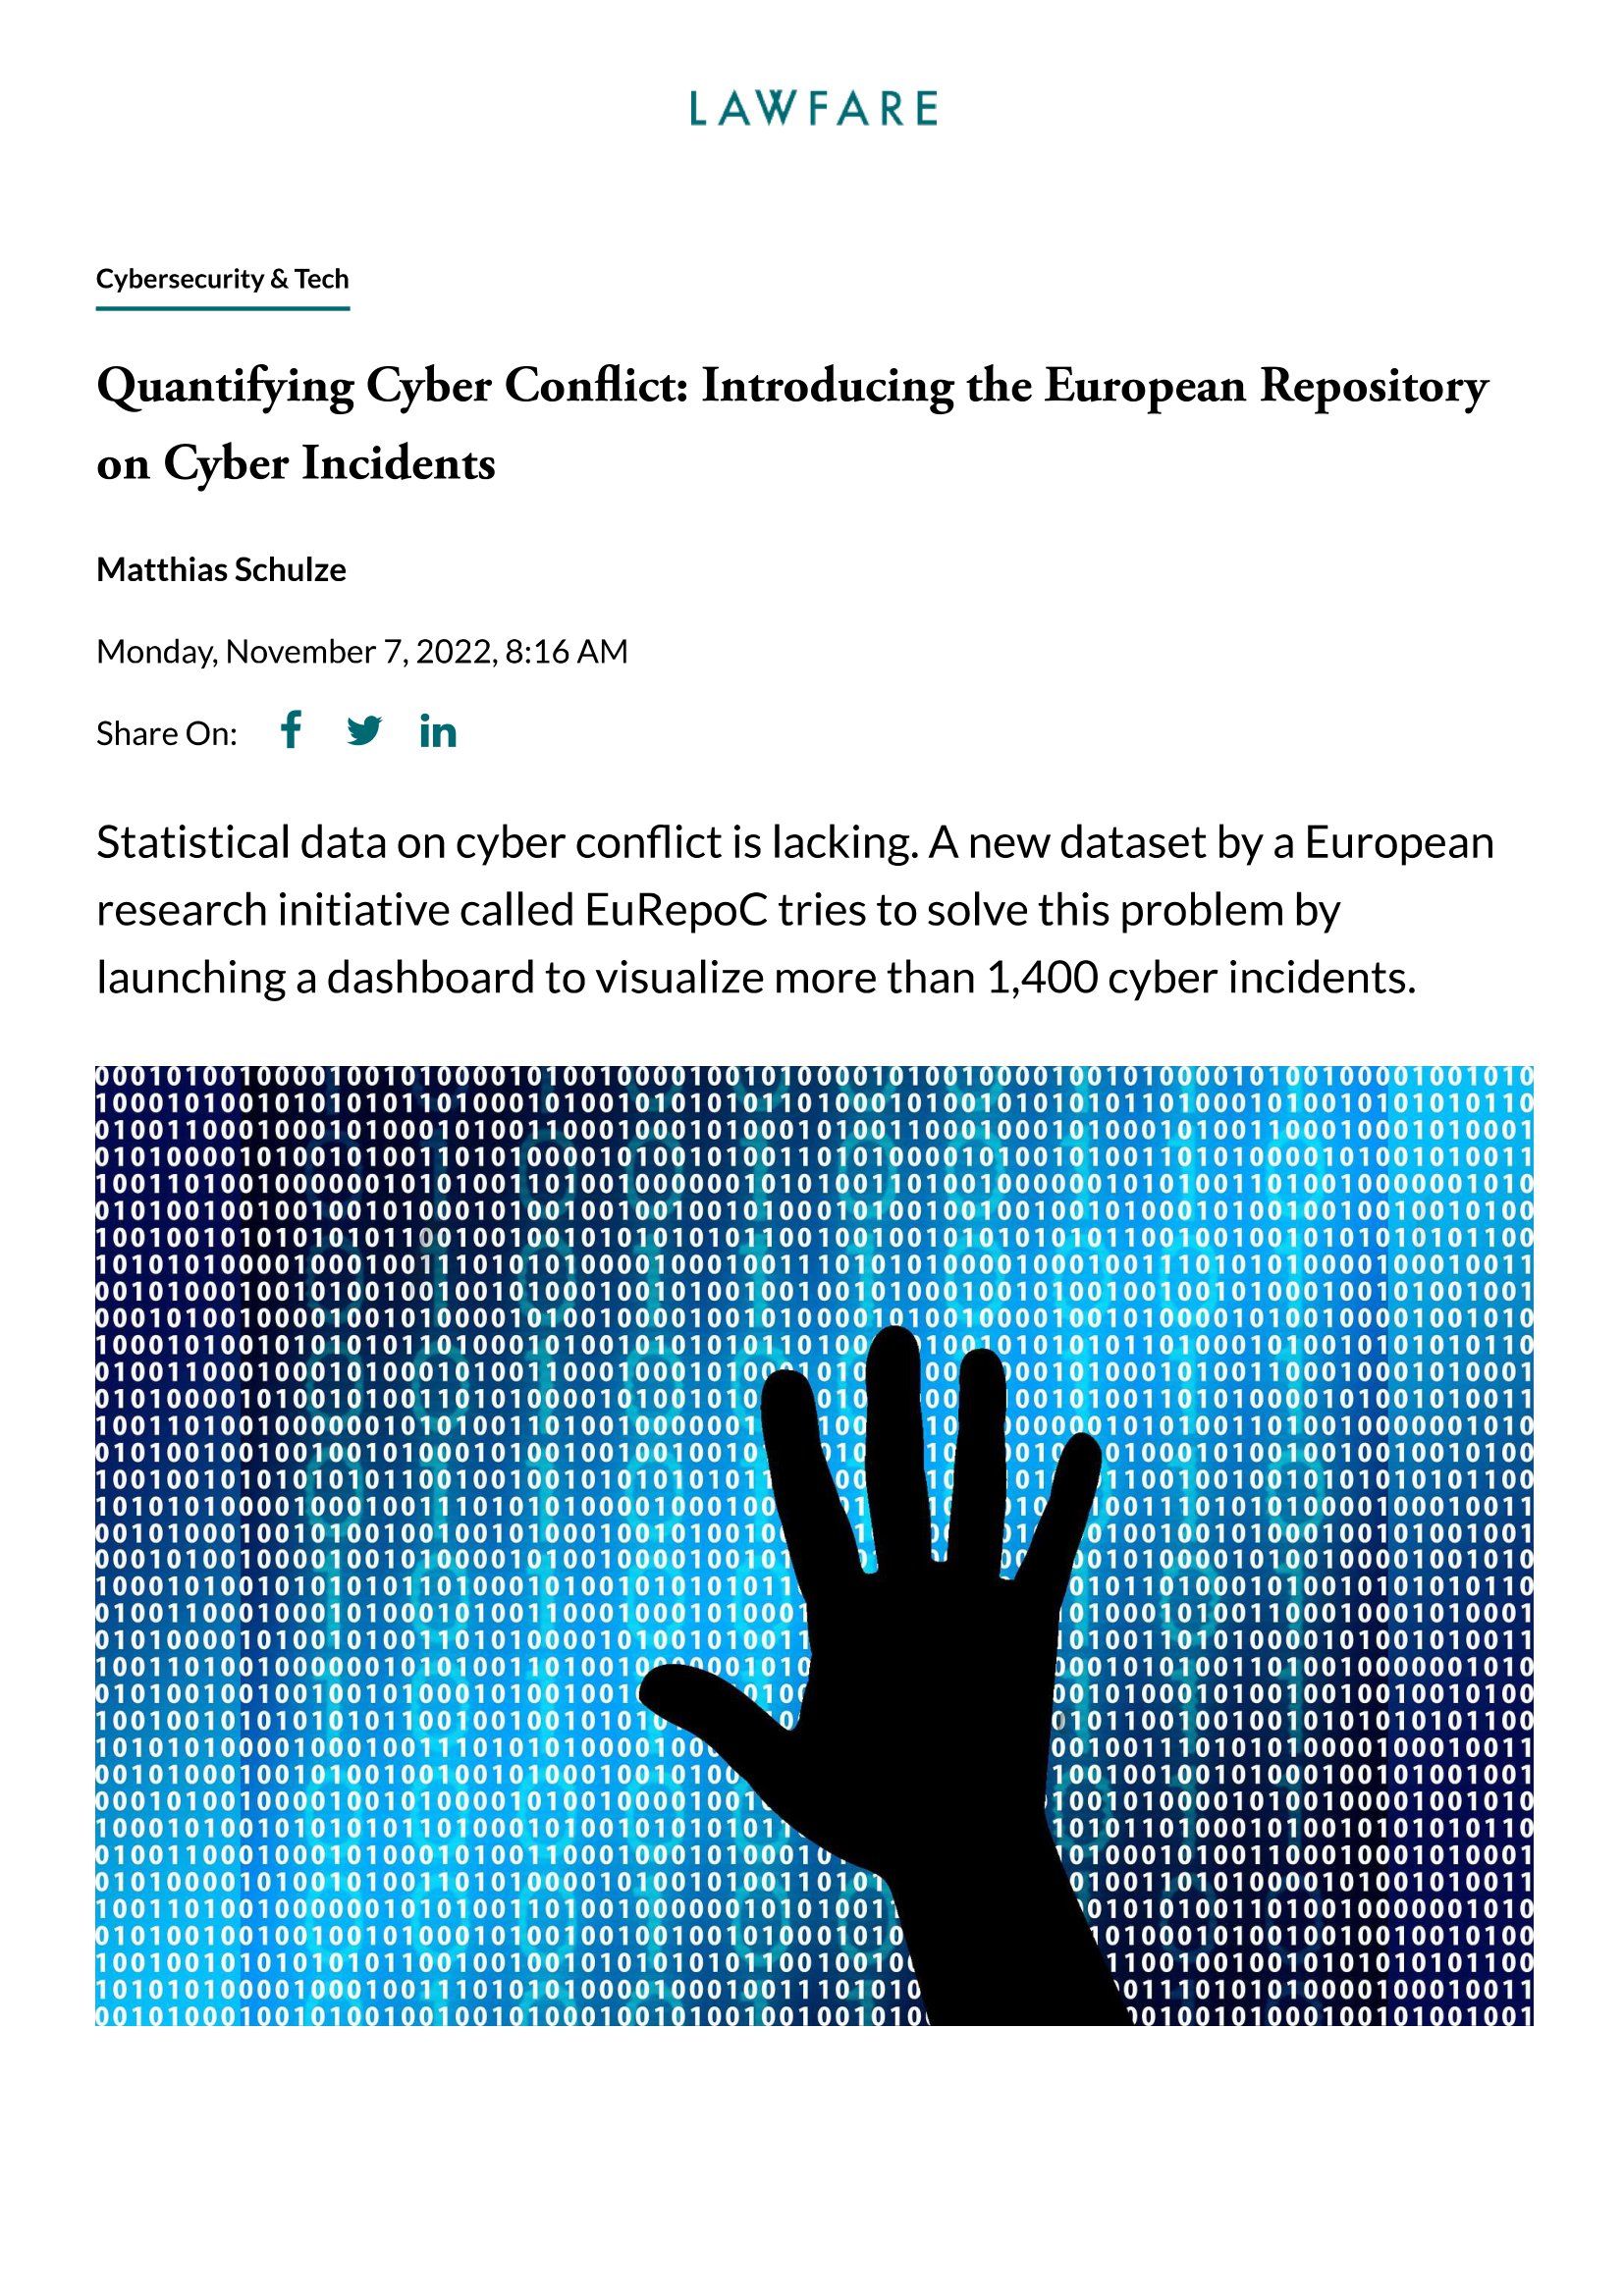 Quantifying Cyber Conflict: Introducing the European Repository on Cyber Incidents